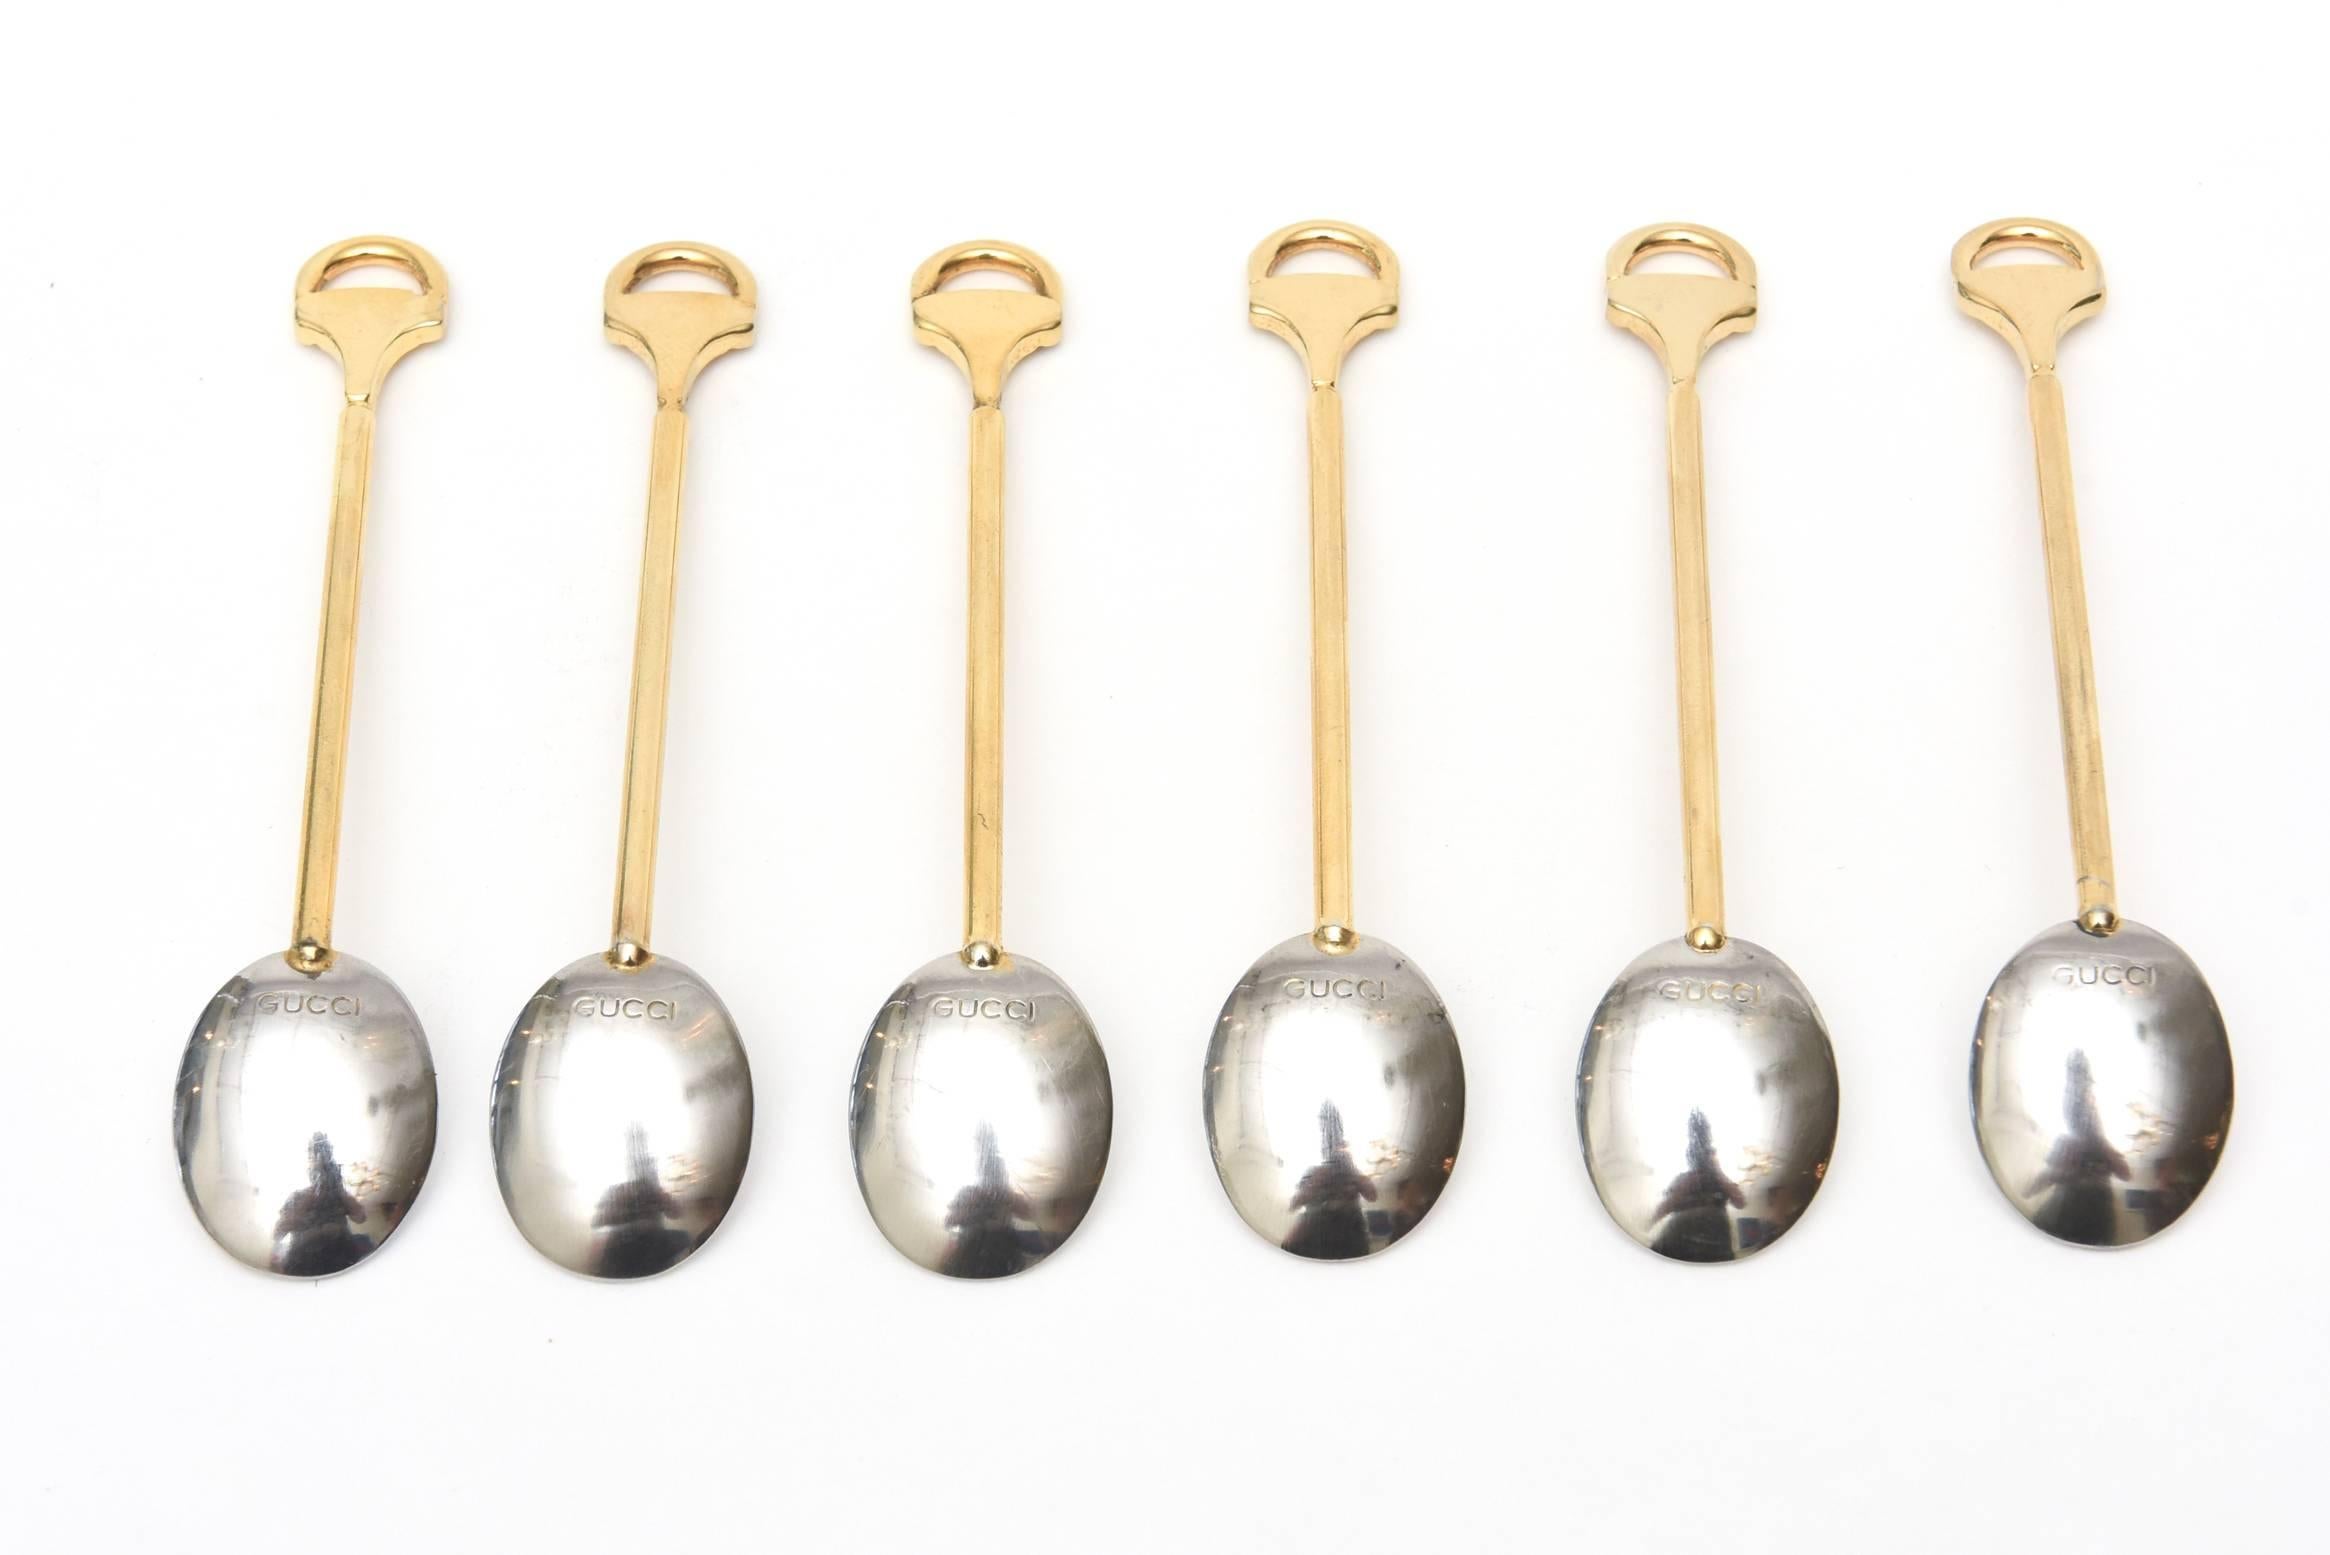 Late 20th Century Set of 6 Italian Hallmarked Gucci Gold Plated/ Silver Demitasse Serving Spoons